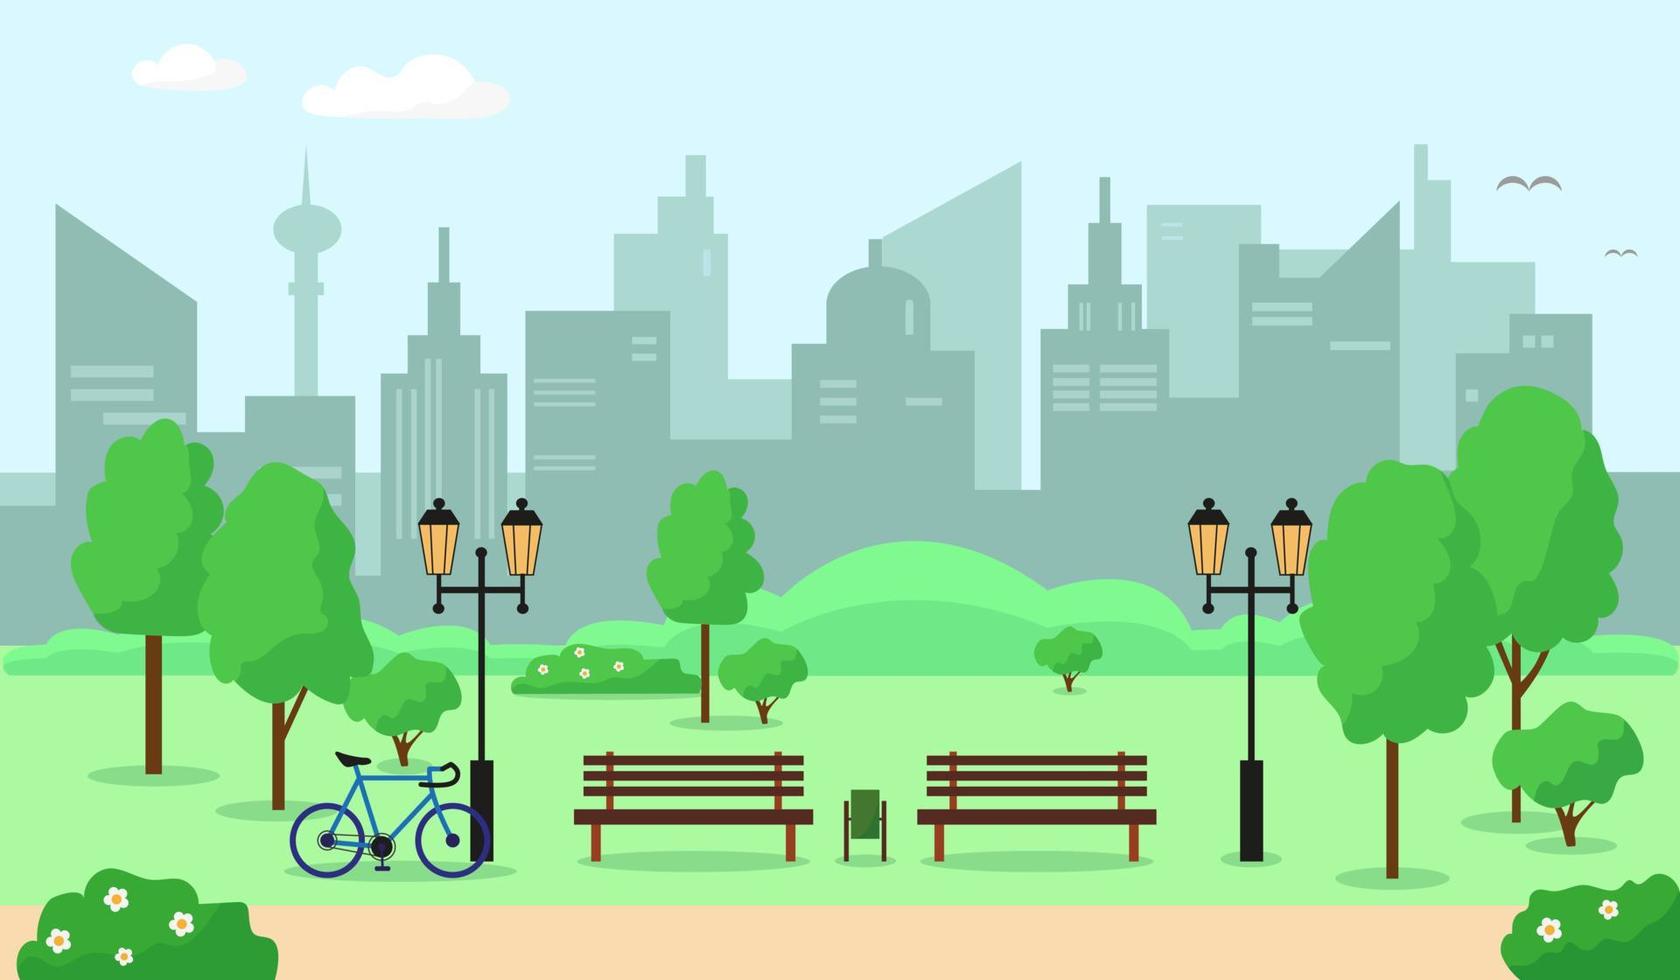 City park with trees, bench, flowers and buildings. Spring or summer landscape background vector illustration.